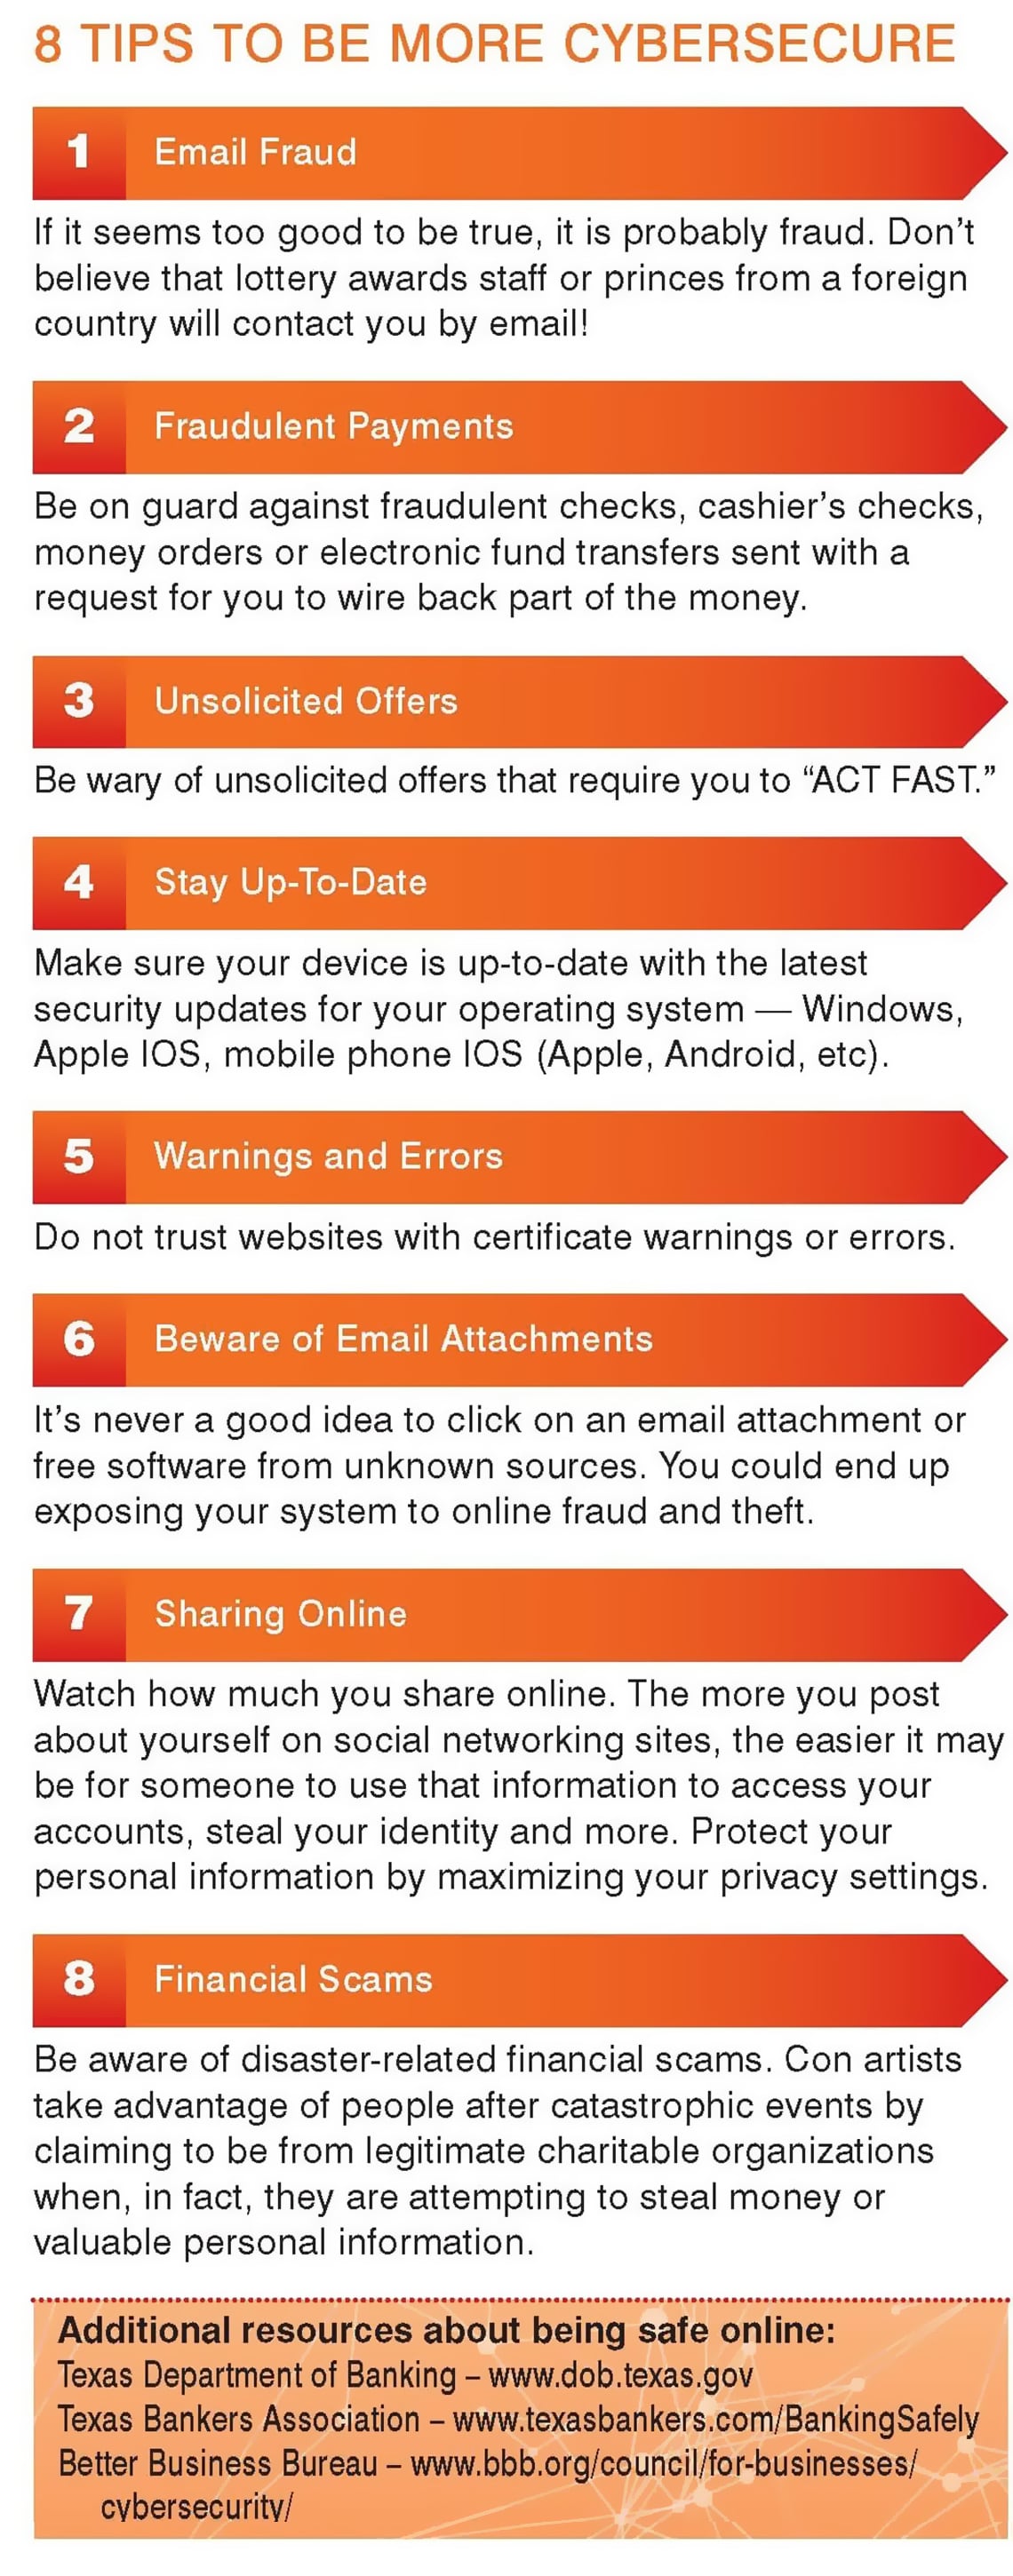 8 Tips to be more cybersecure